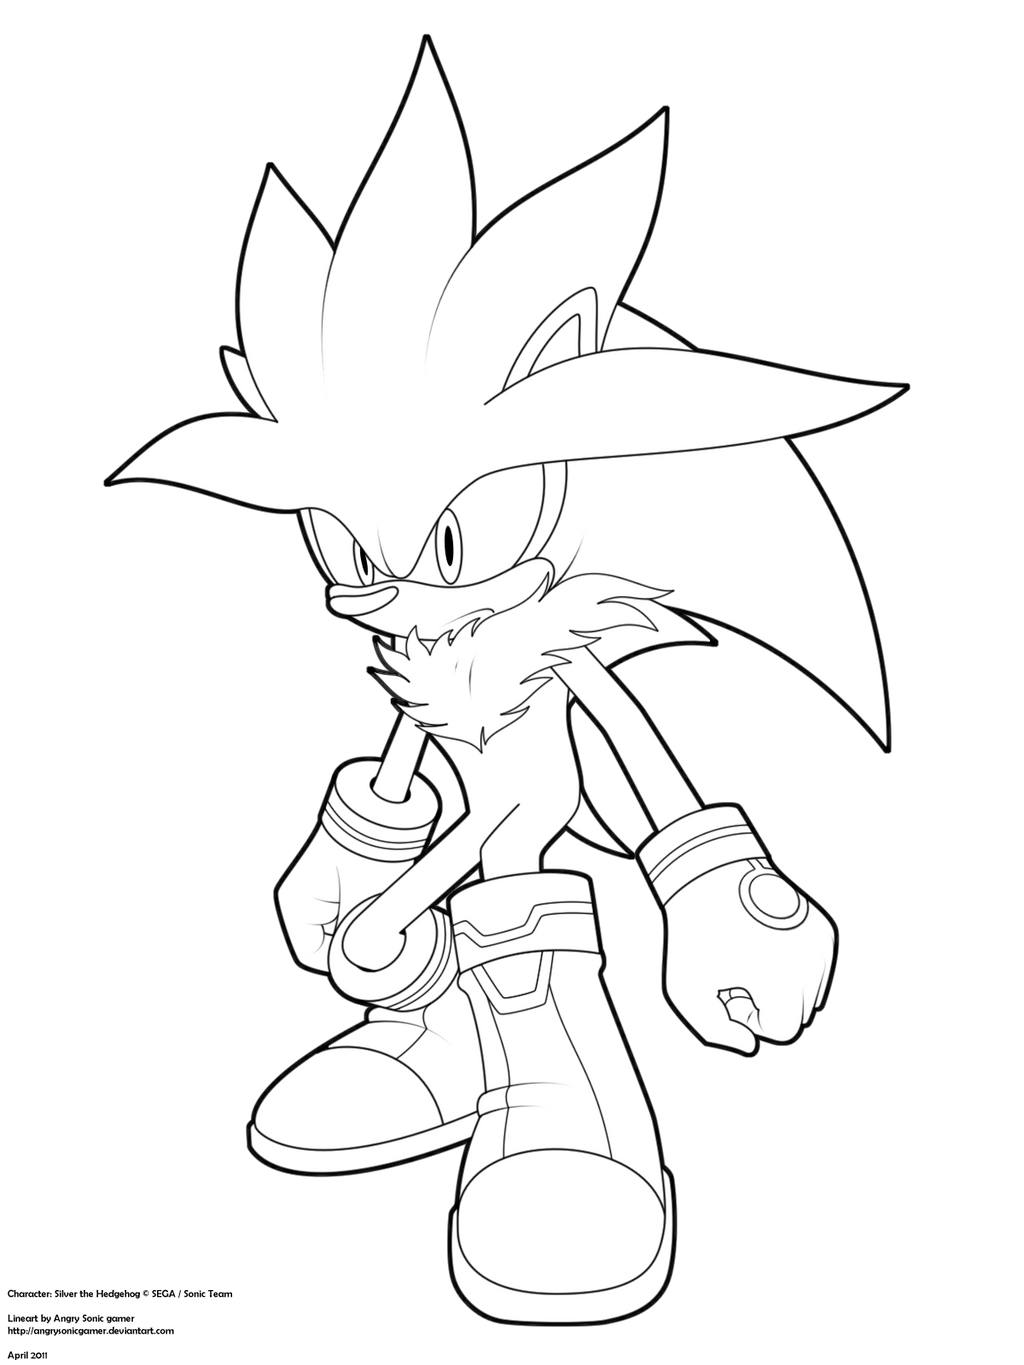 34+ silver the hedgehog coloring pages Silver coloring pages at getdrawings